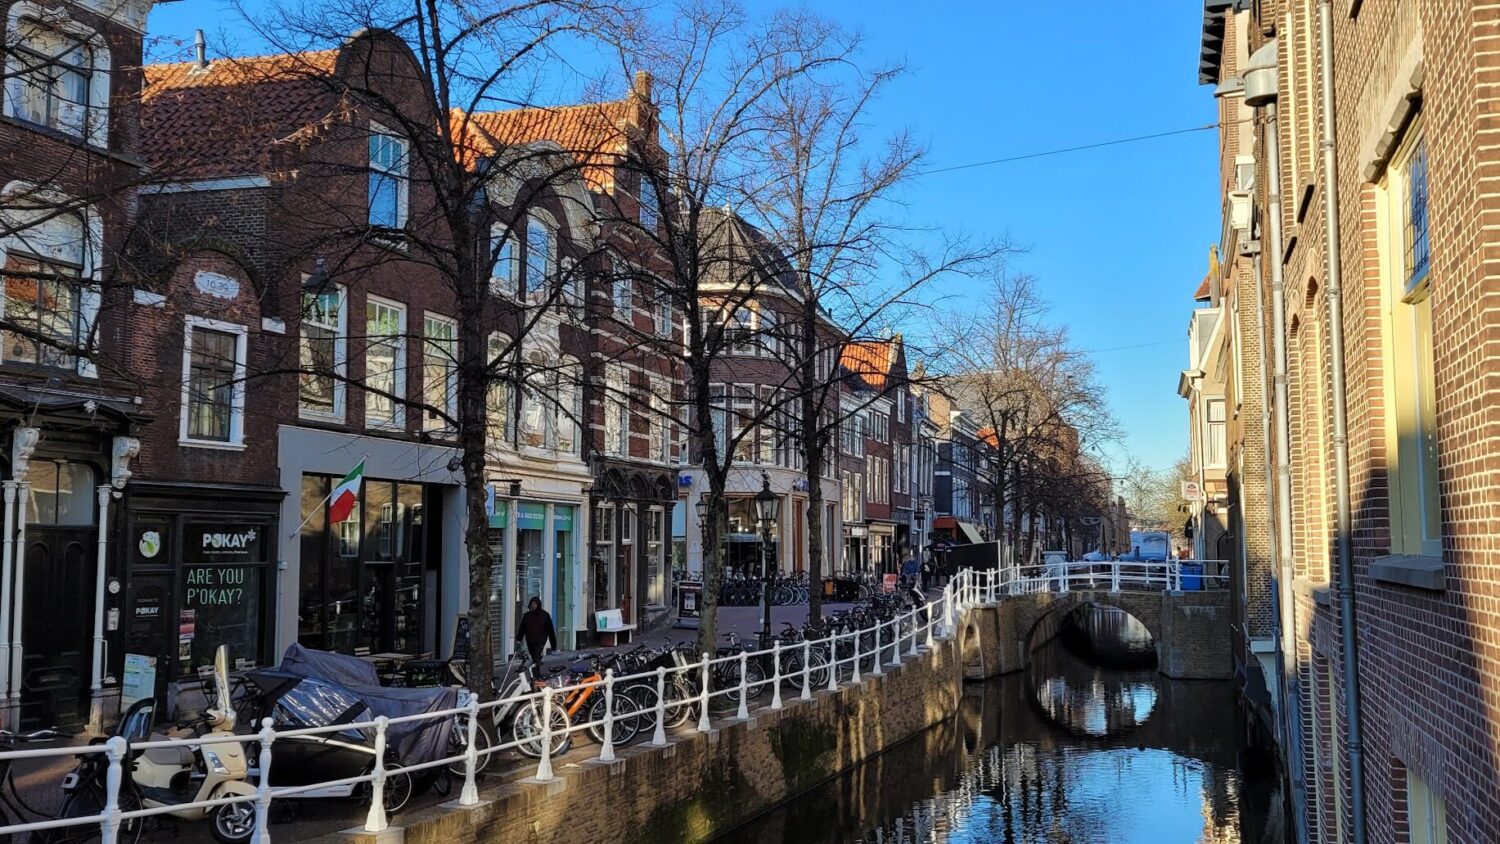 Charming Canals in the Dutch city of Delft, Netherlands | Photo ©️ travellifebalance.com